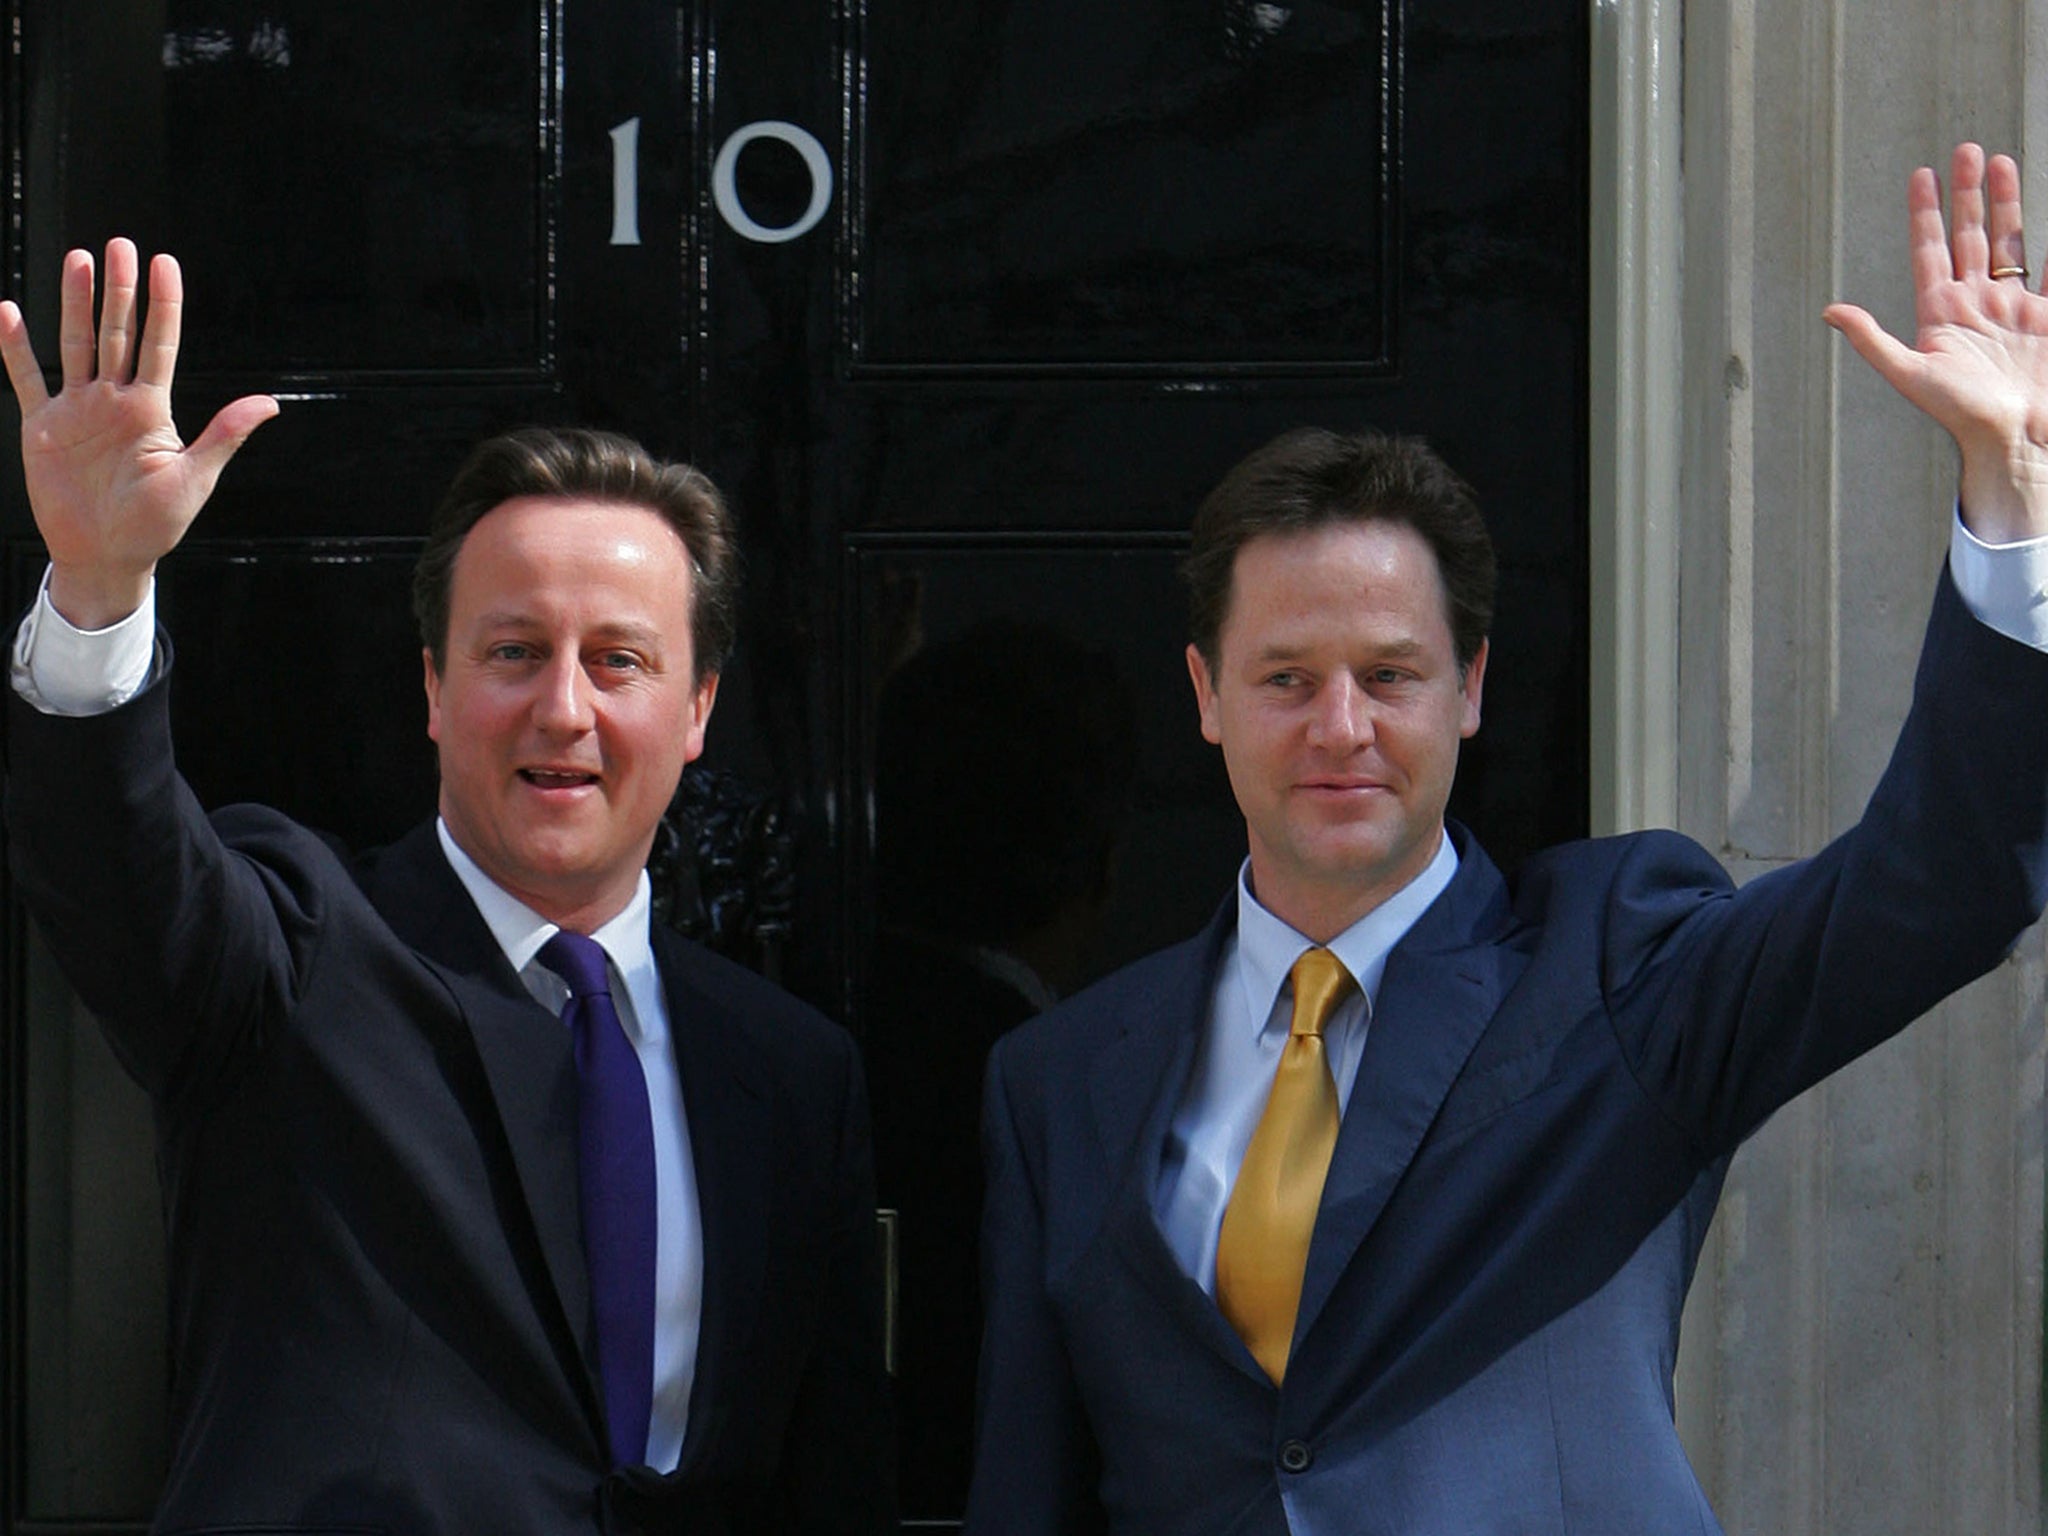 The 2010-formed Coalition was led by a partly reformed Conservative Party, checked and balanced by Nick Clegg